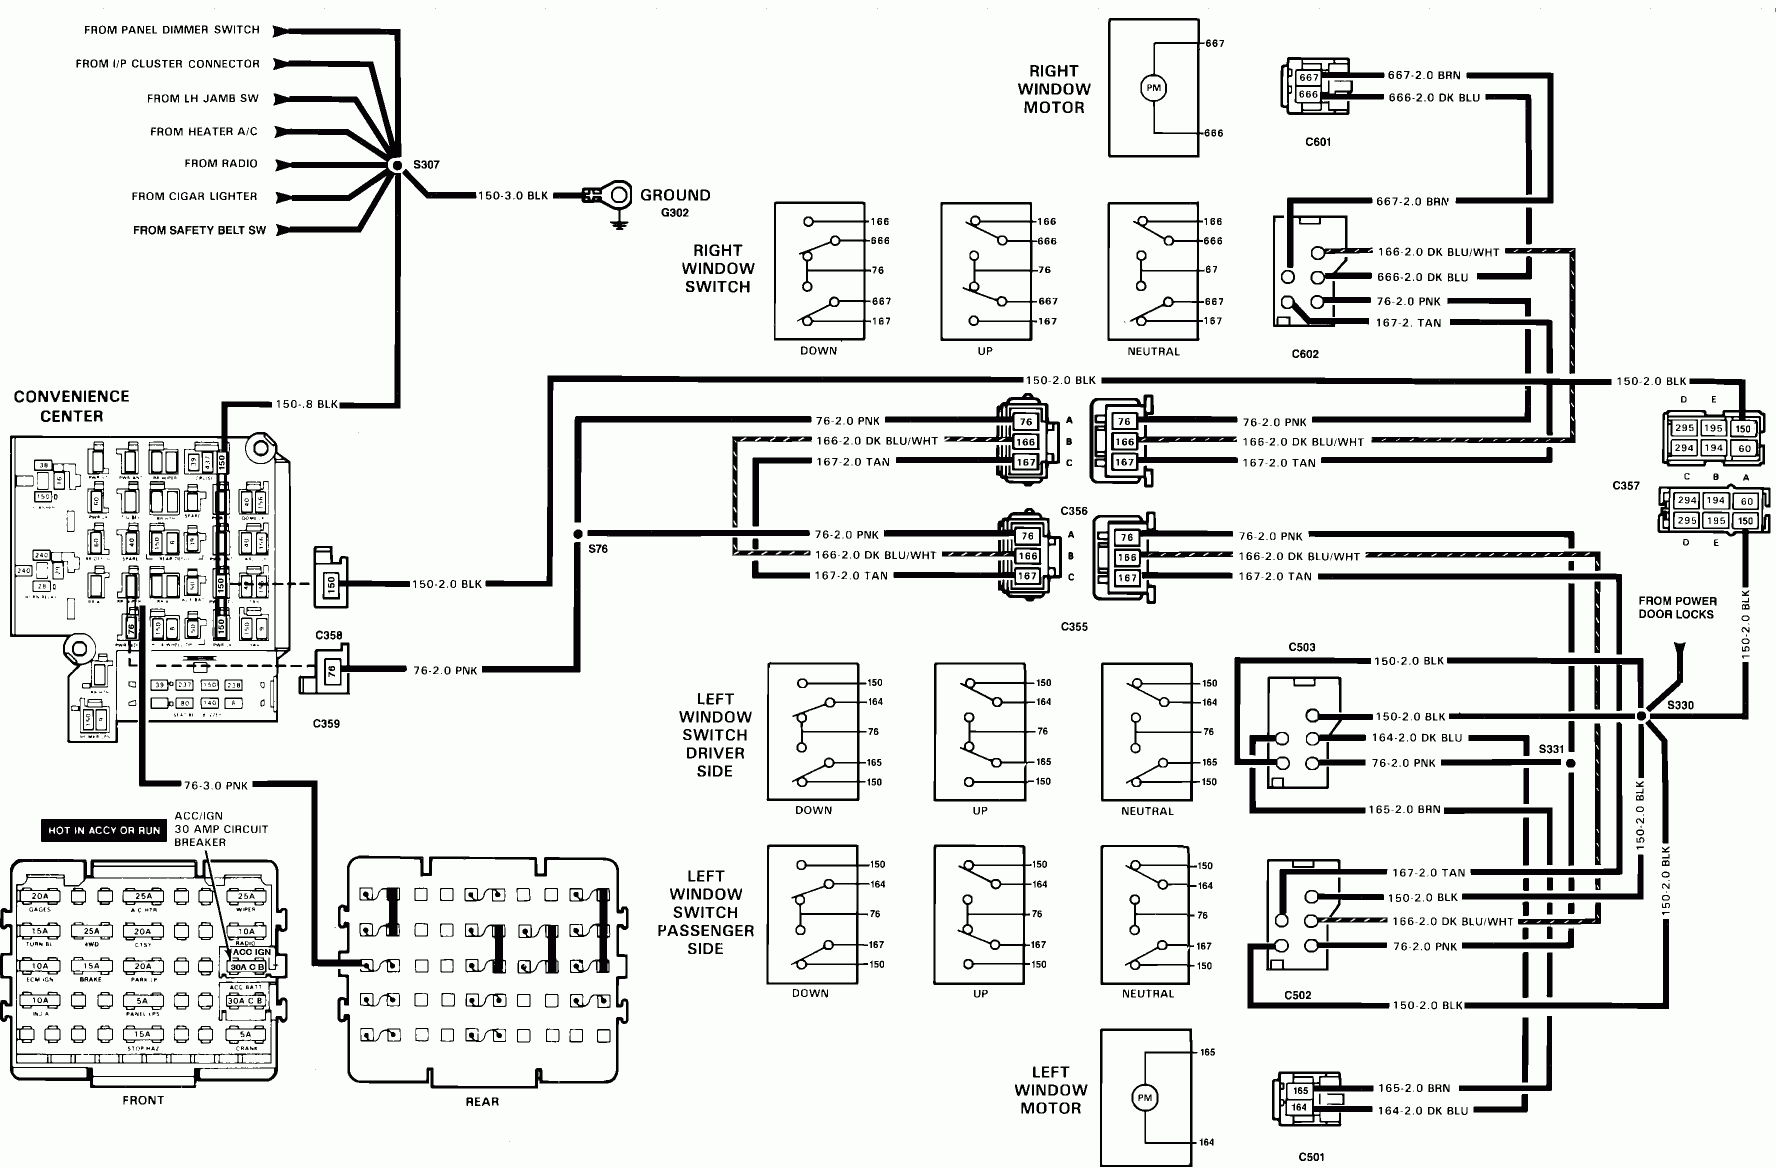 1990 Chevy 1500 Wiring Diagram - Wiring Diagram Explained - 1990 Chevy 1500 Fuel Pump Wiring Diagram